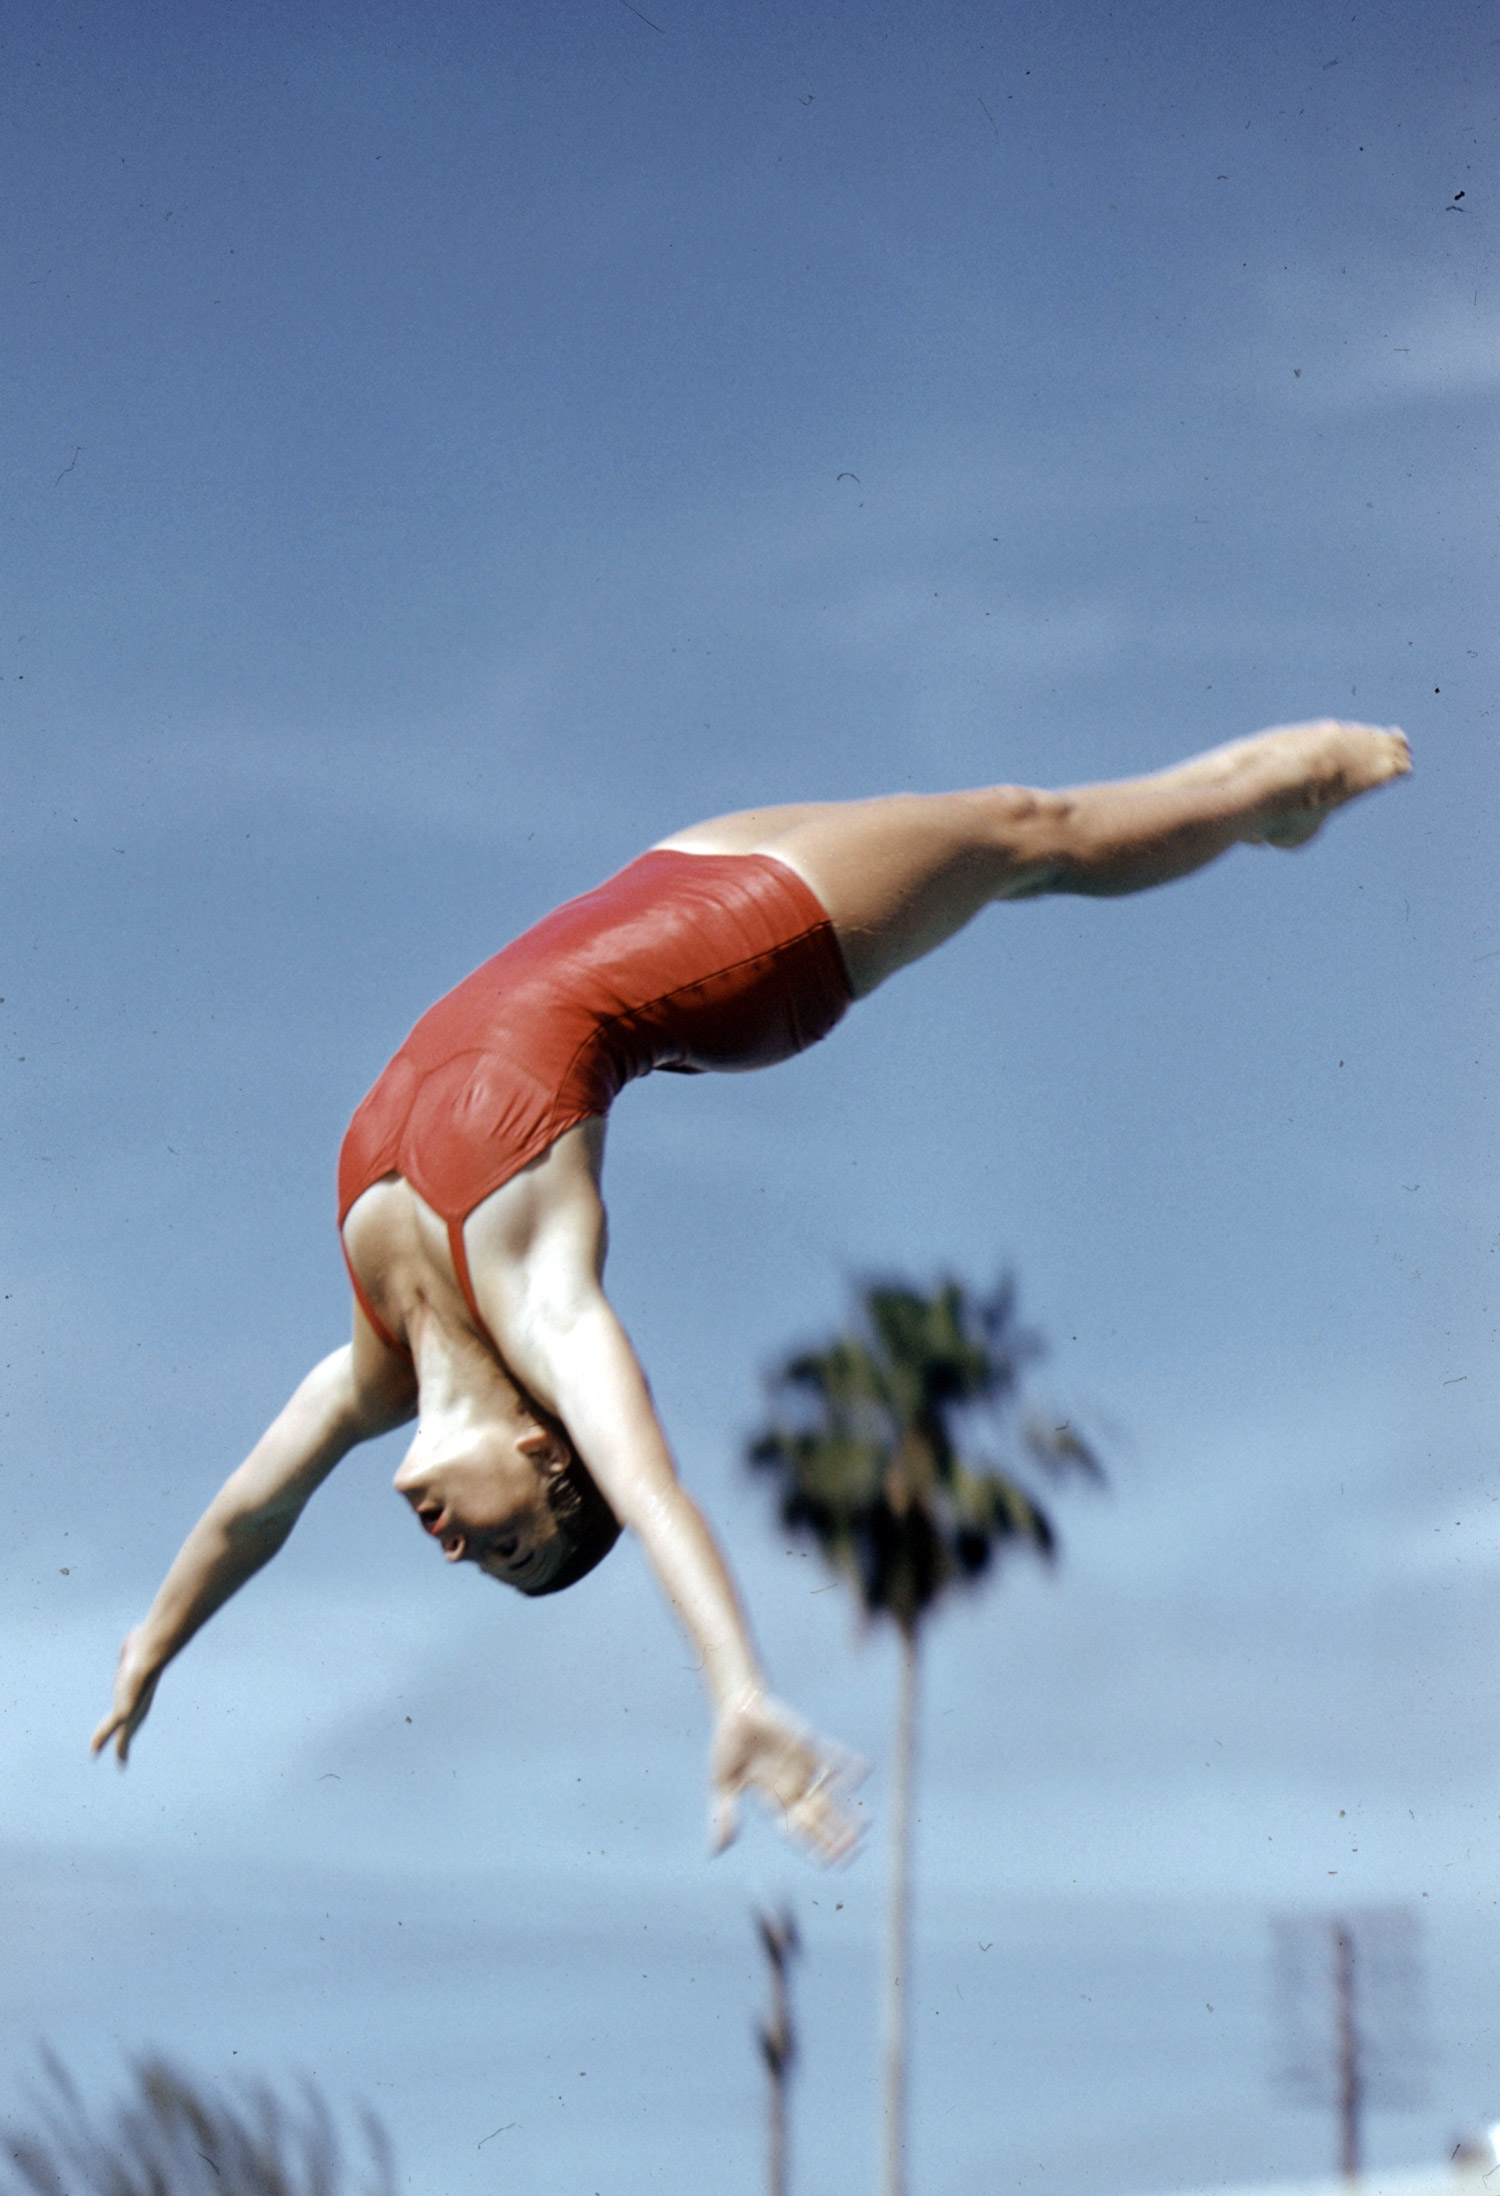 Women's diving champions in Florida, 1959.